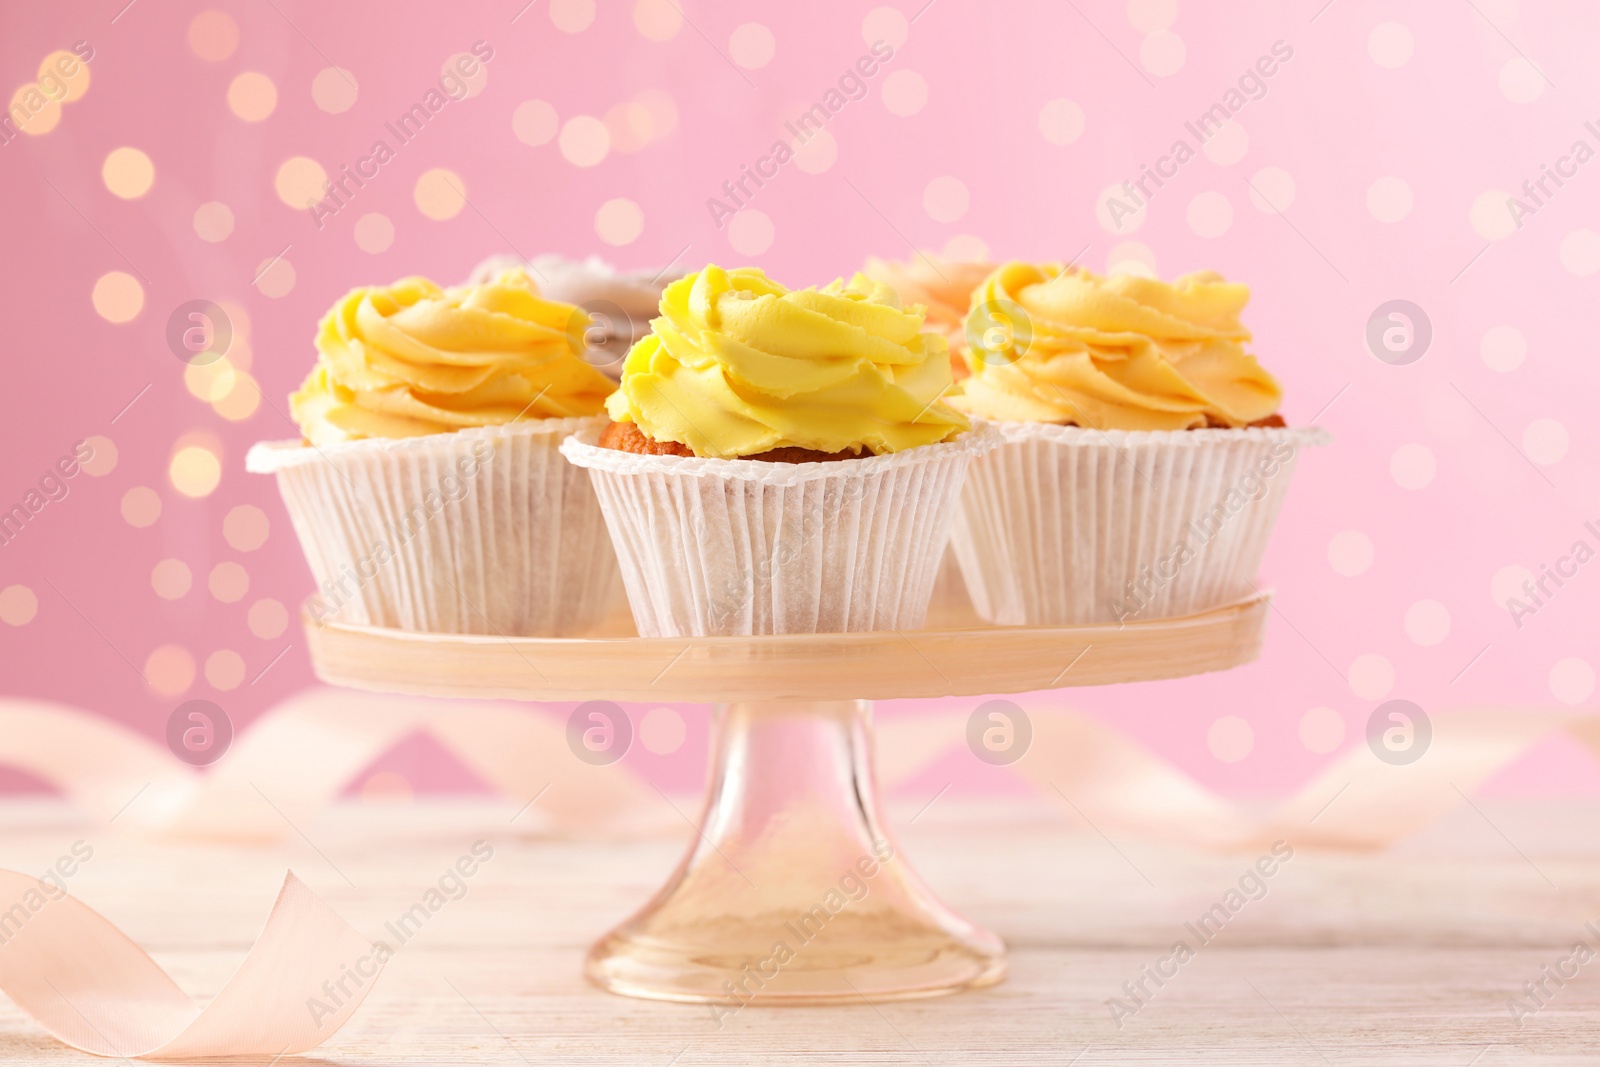 Photo of Stand with tasty cupcakes on white wooden table against blurred lights